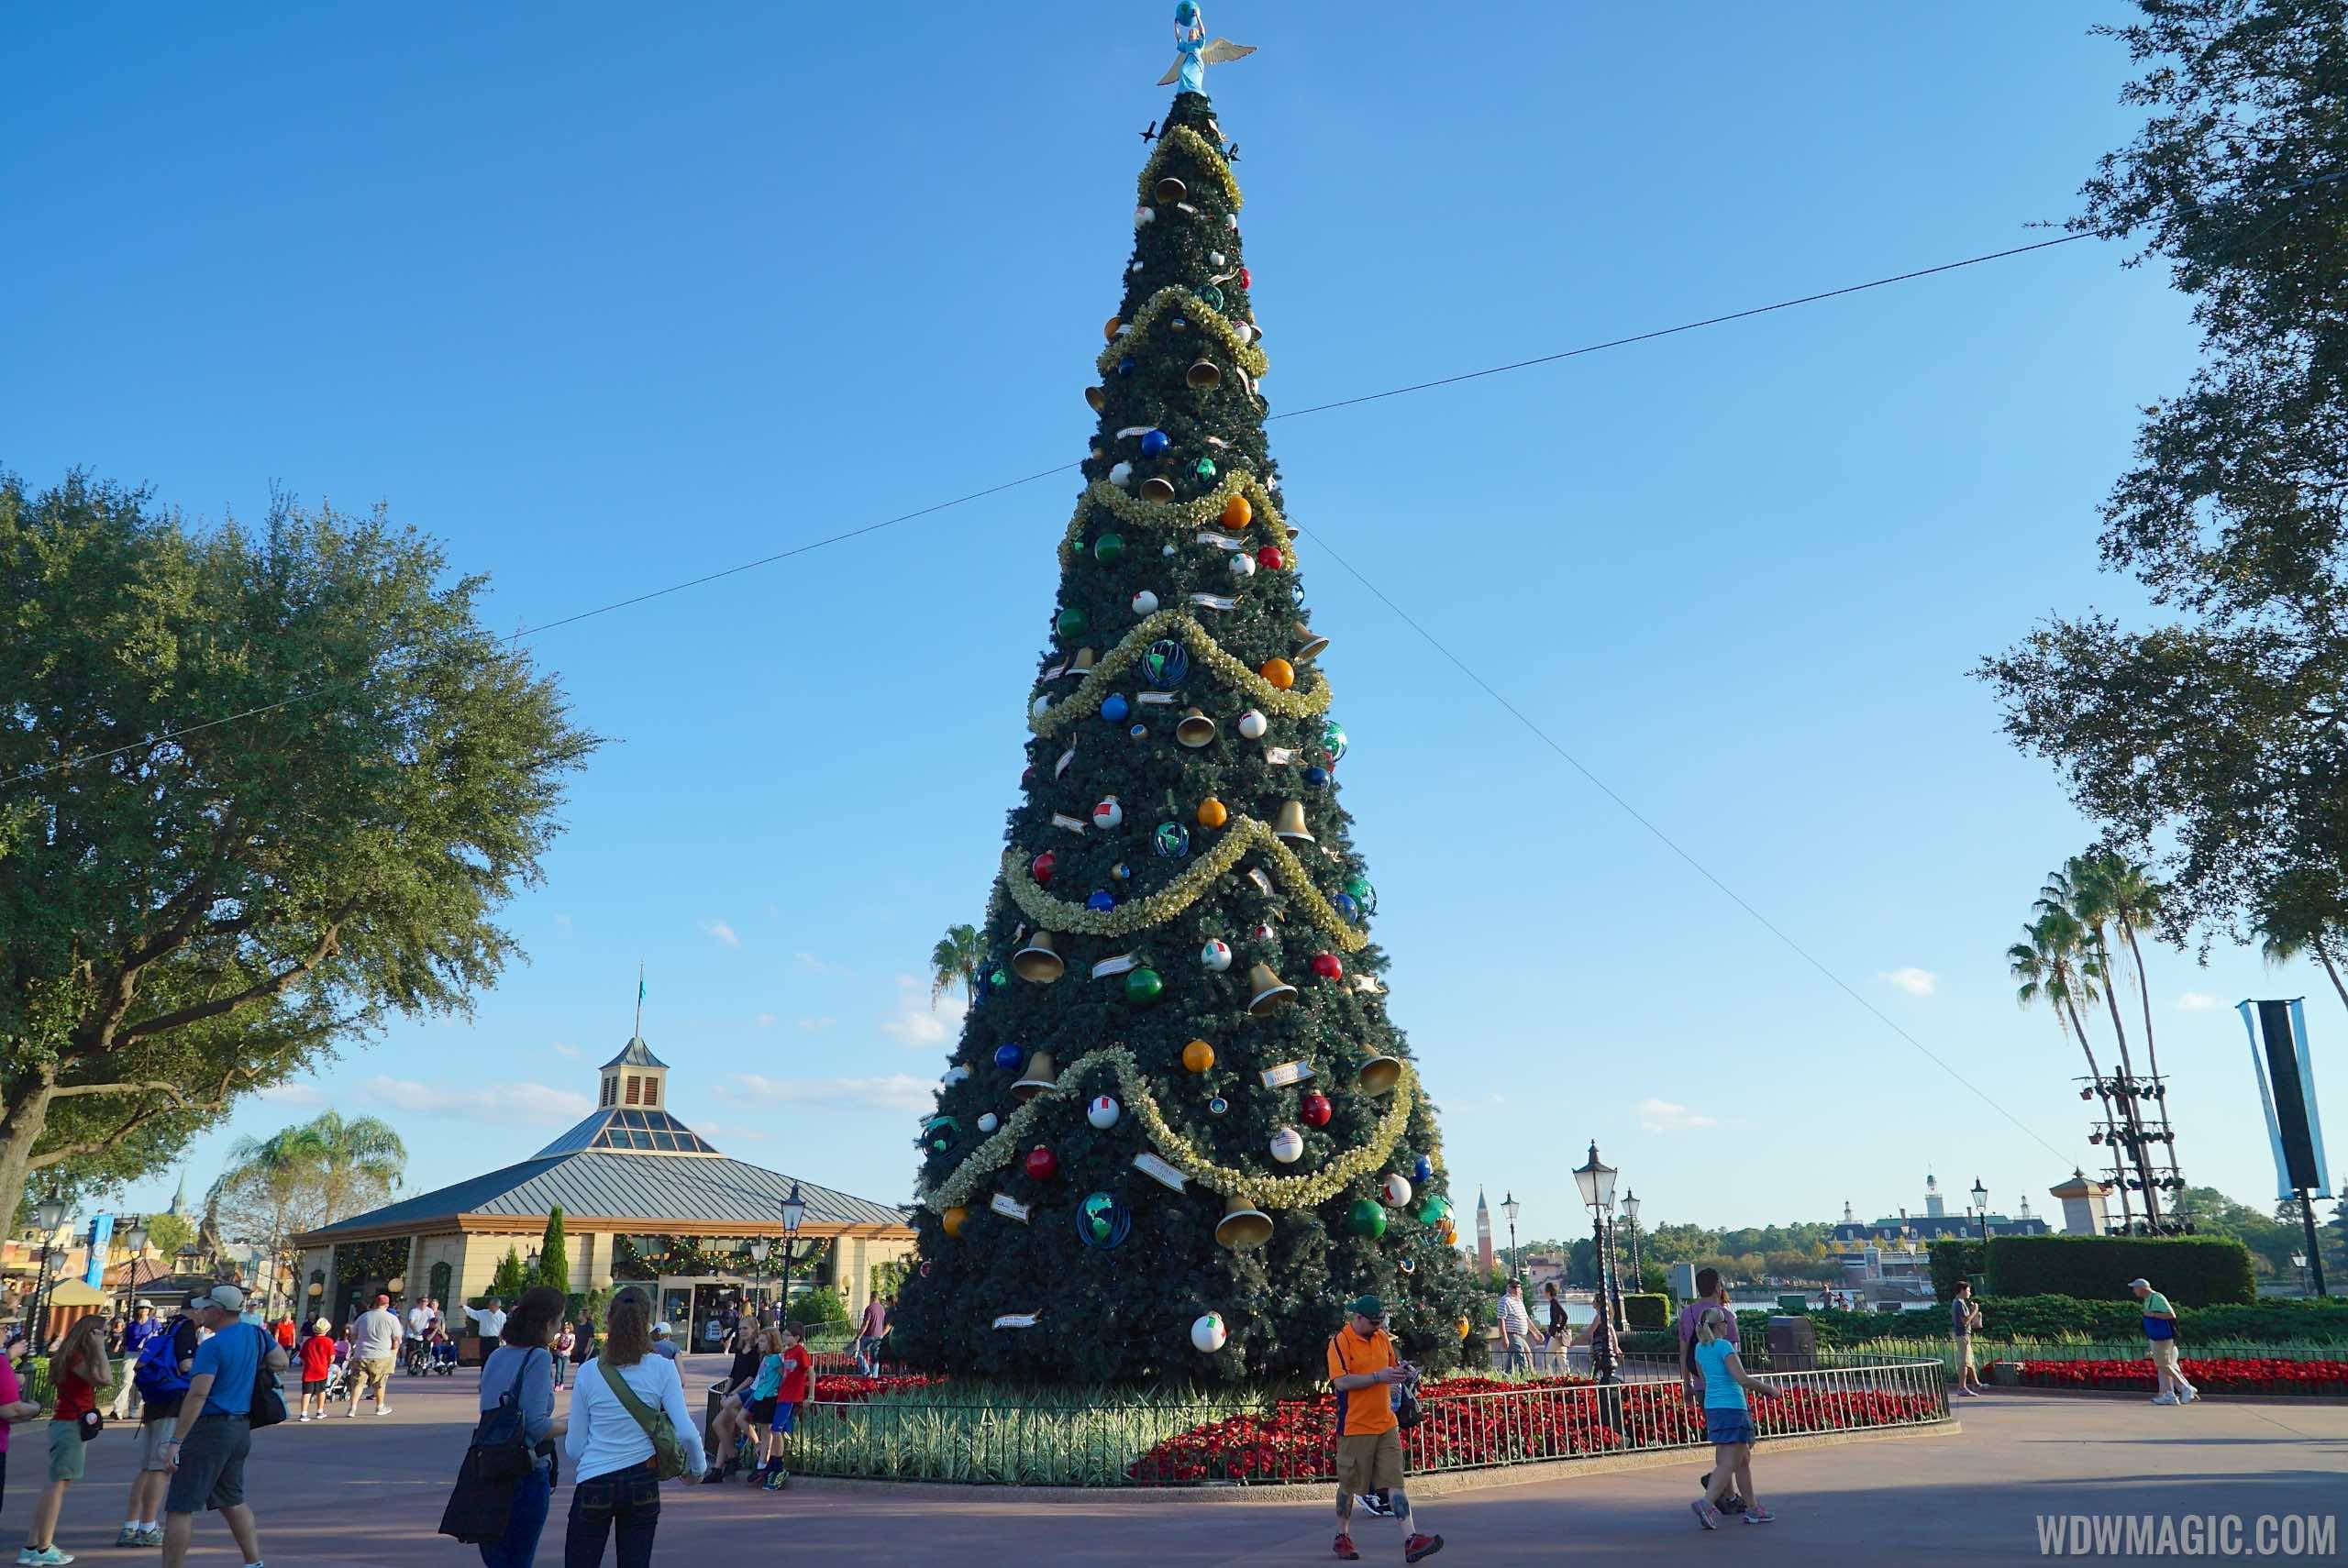 PHOTOS - Epcot's holiday decorations are now in place